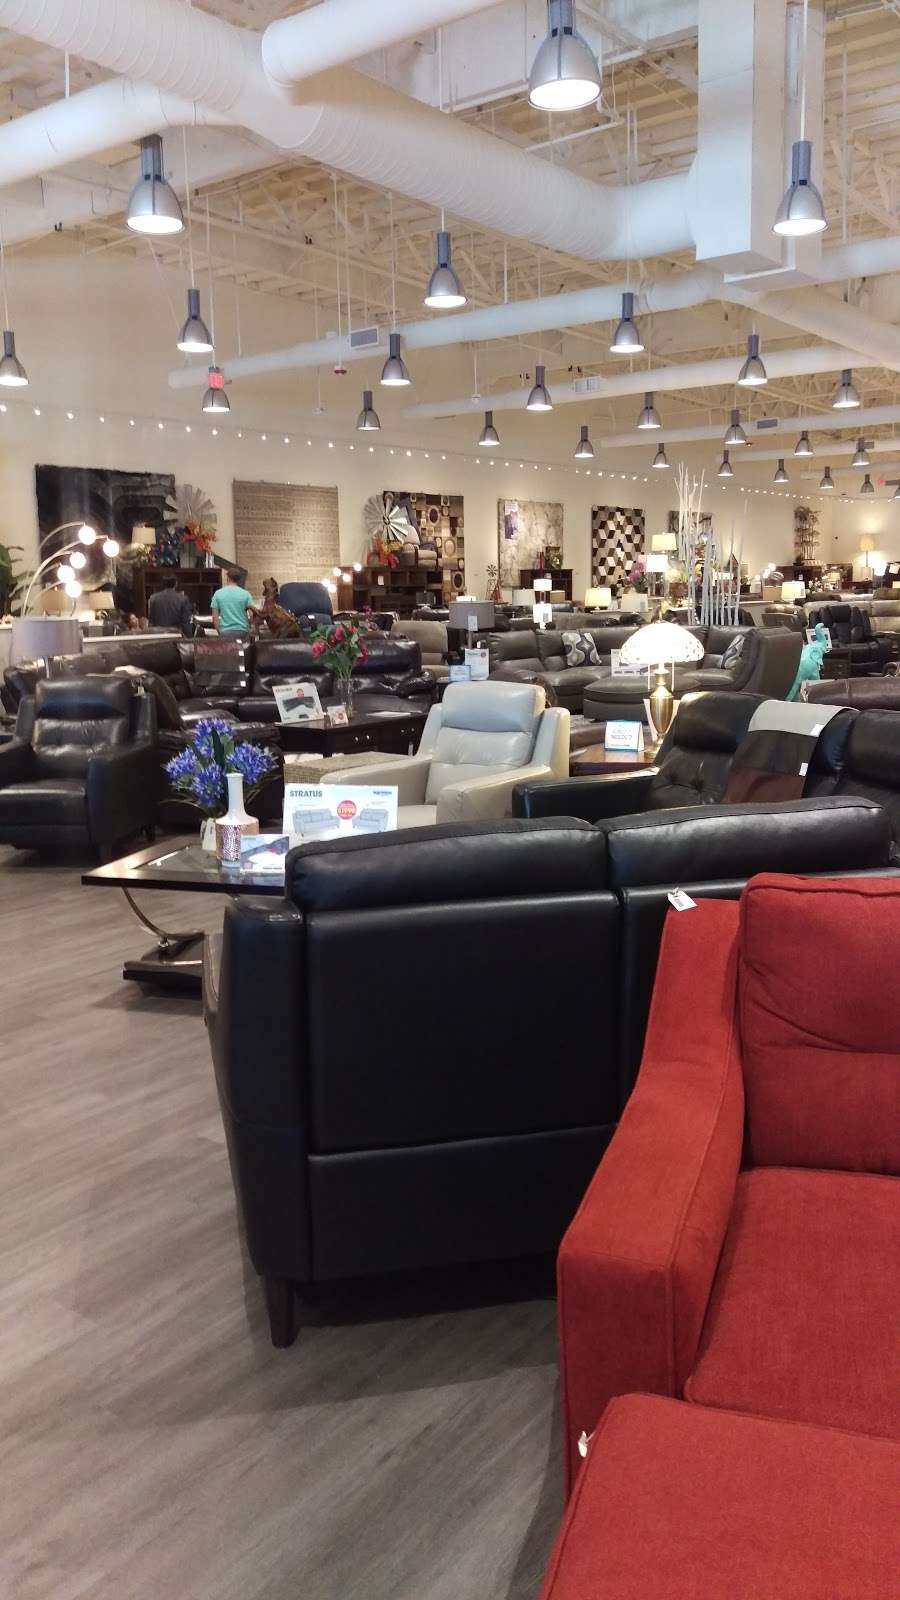 Bob’s Discount Furniture and Mattress Store | 25560 The Old Rd, Valencia, CA 91381, USA | Phone: (661) 523-3422